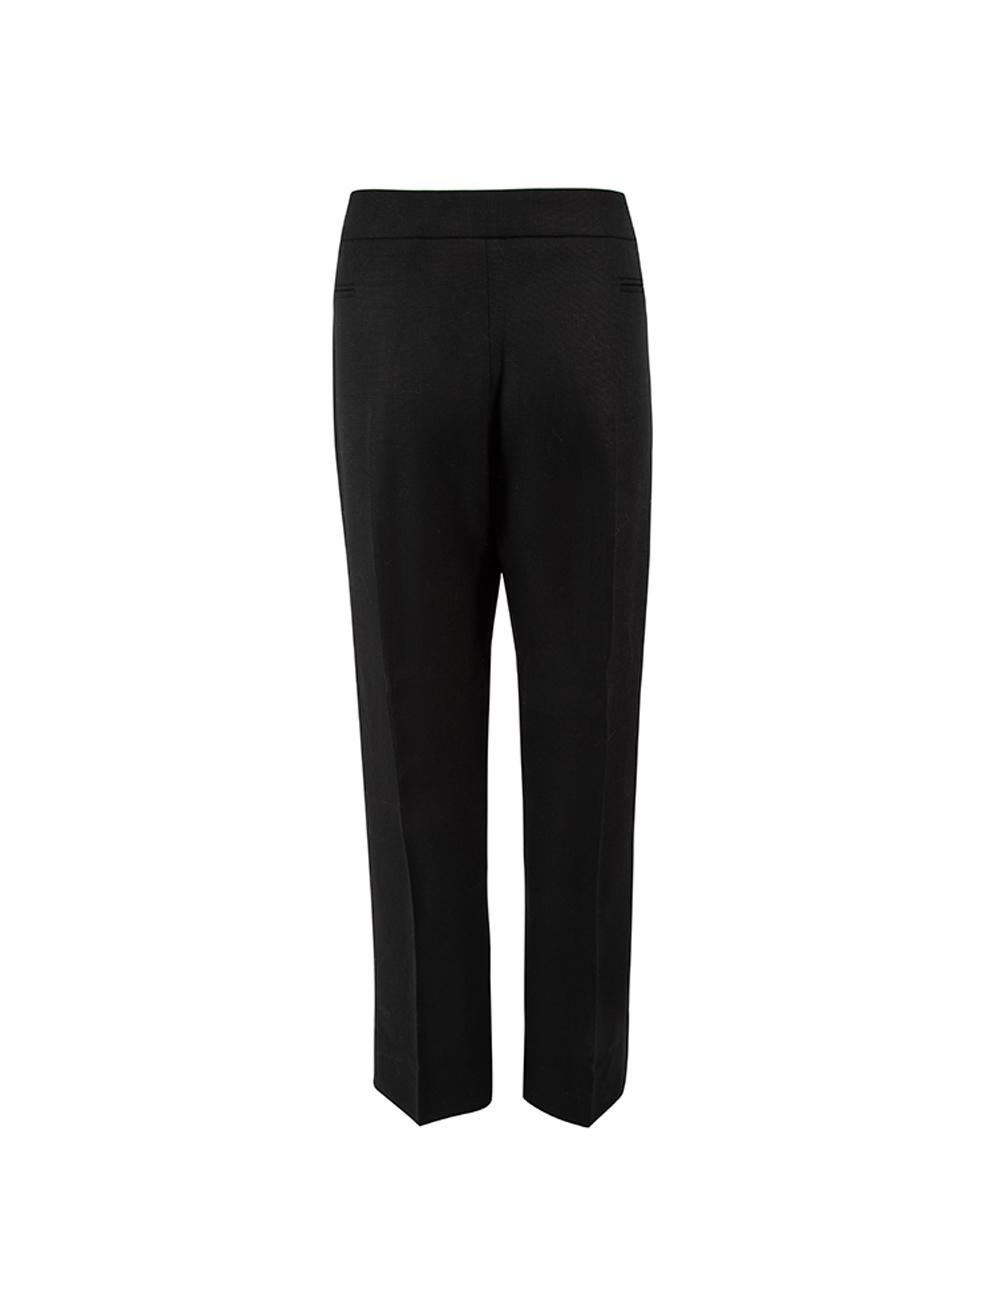 Pre-Loved Jacquemus Women's Black Wool Straight Leg Trousers In Excellent Condition For Sale In London, GB